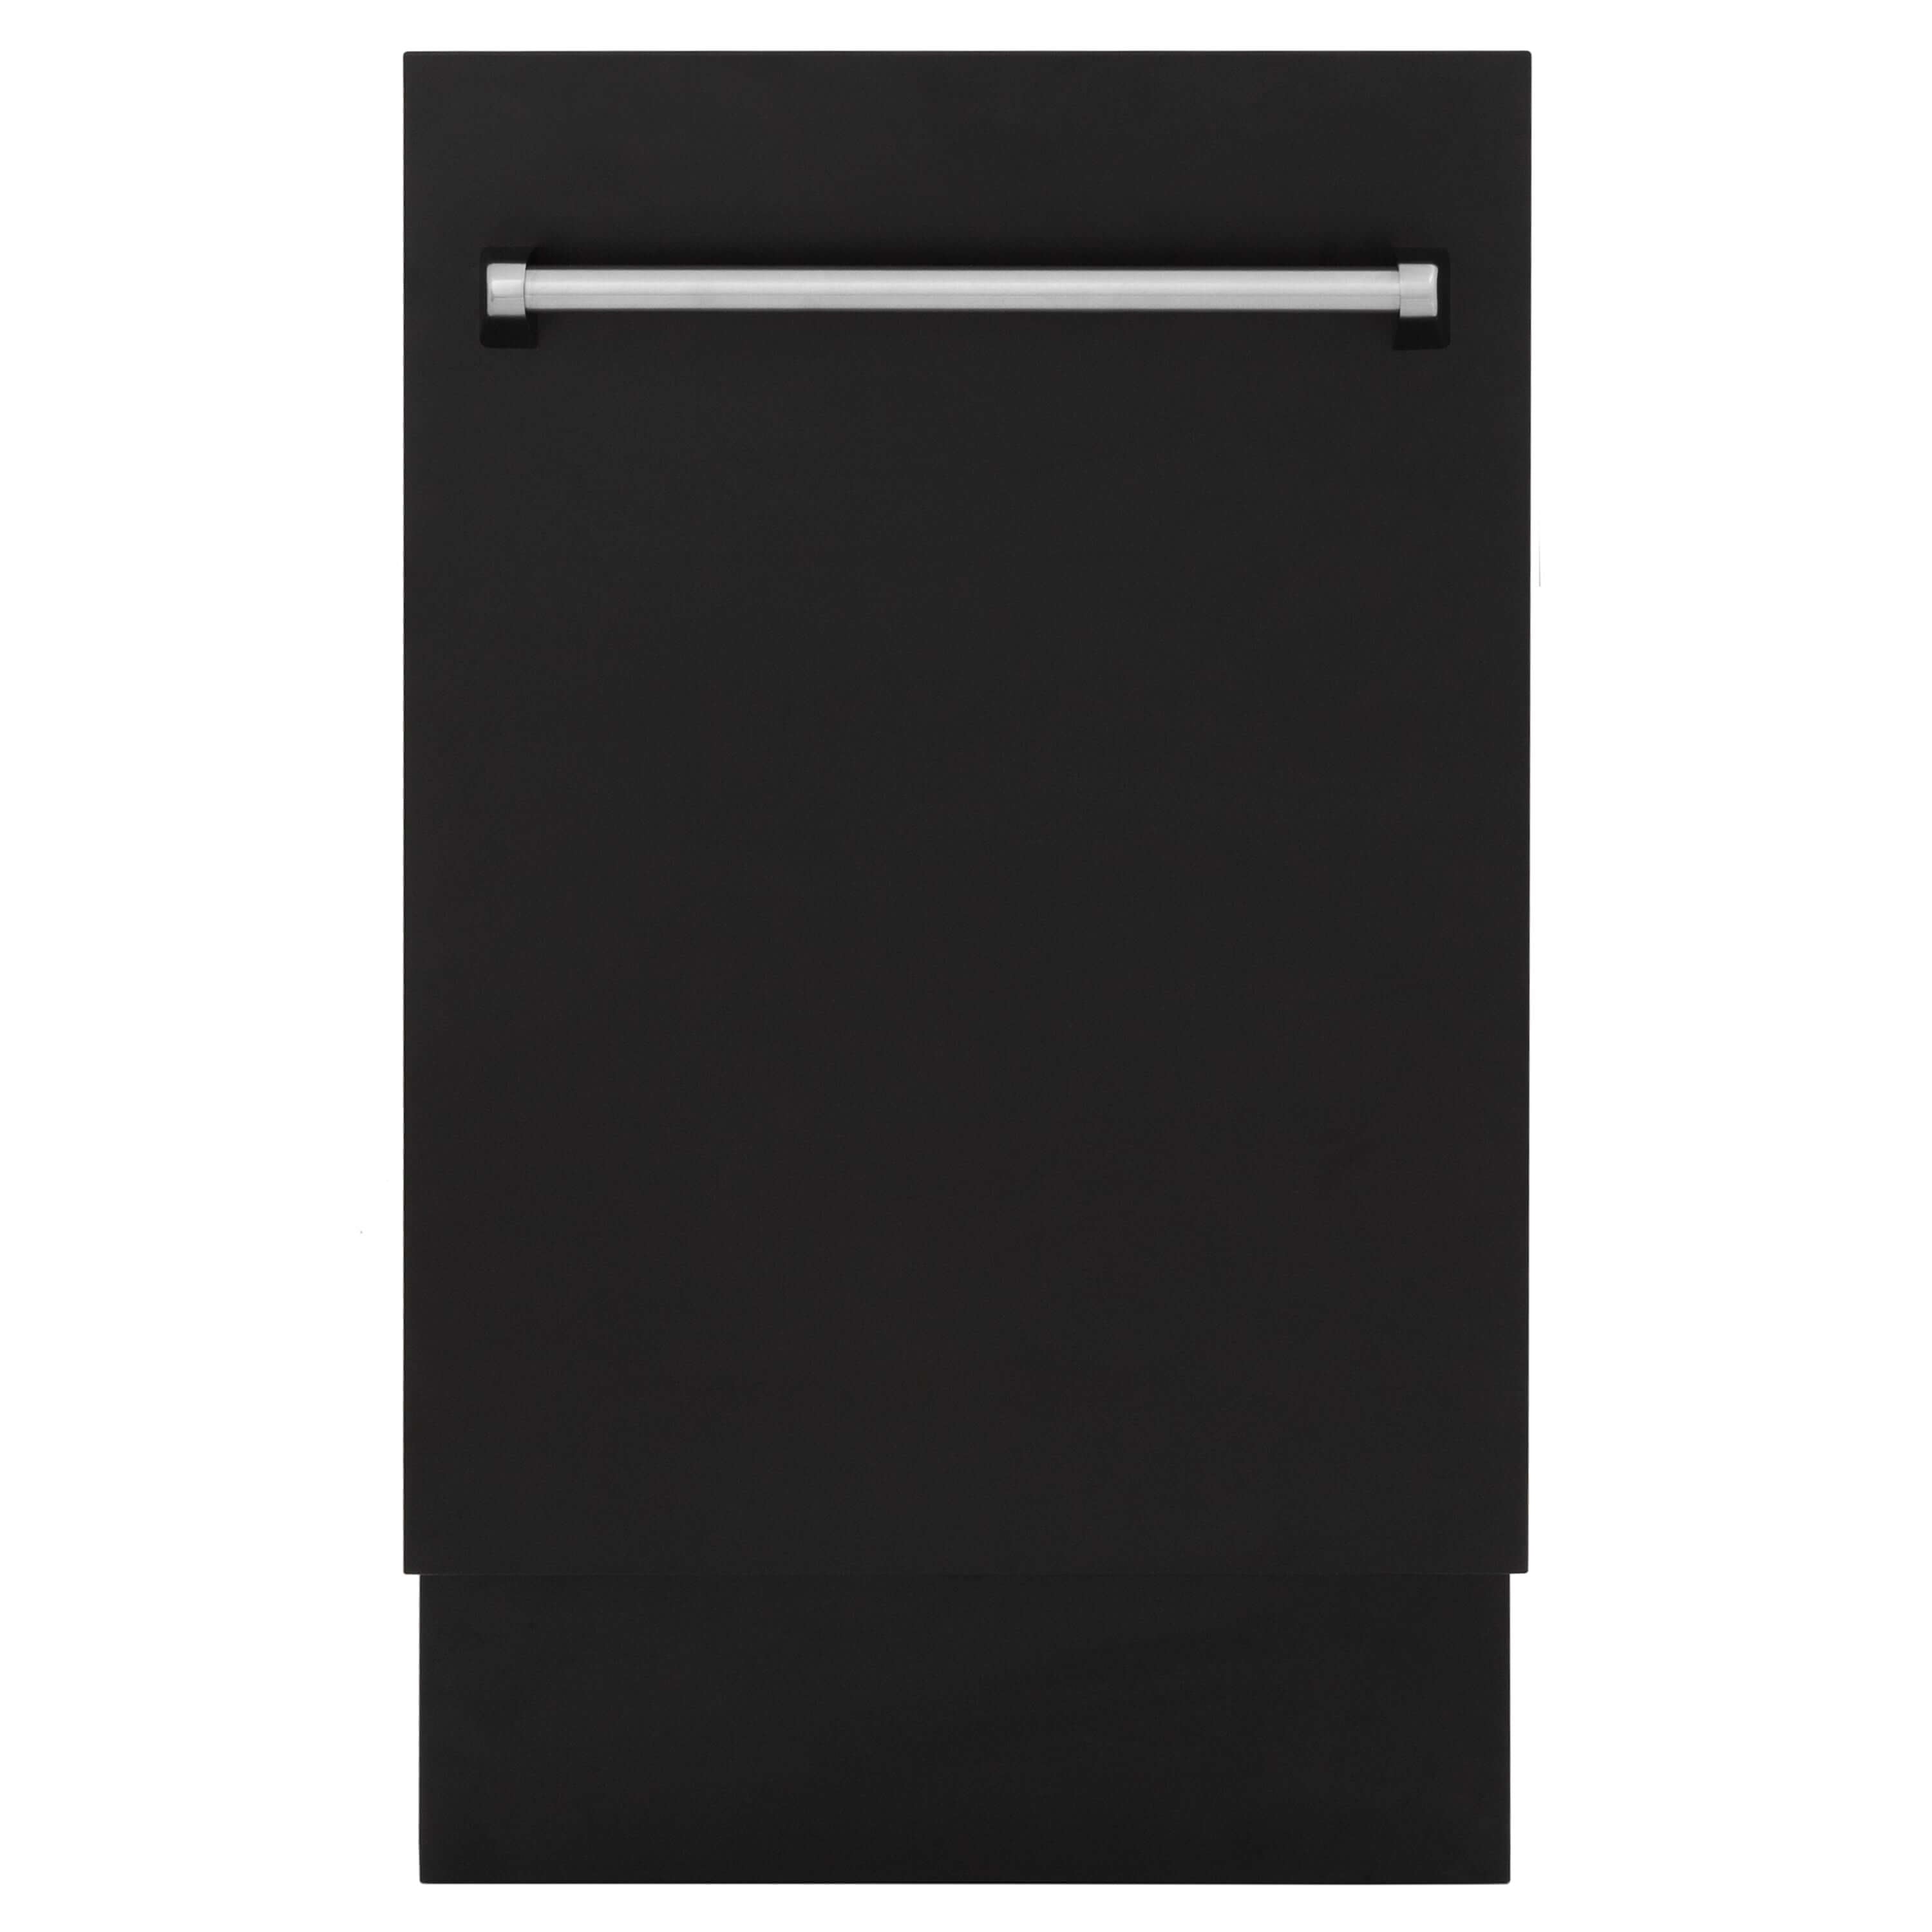 ZLINE 18 in. Tallac Series 3rd Rack Top Control Dishwasher in a Stainless Steel Tub with Black Matte Panel, 51dBa (DWV-BLM-18)